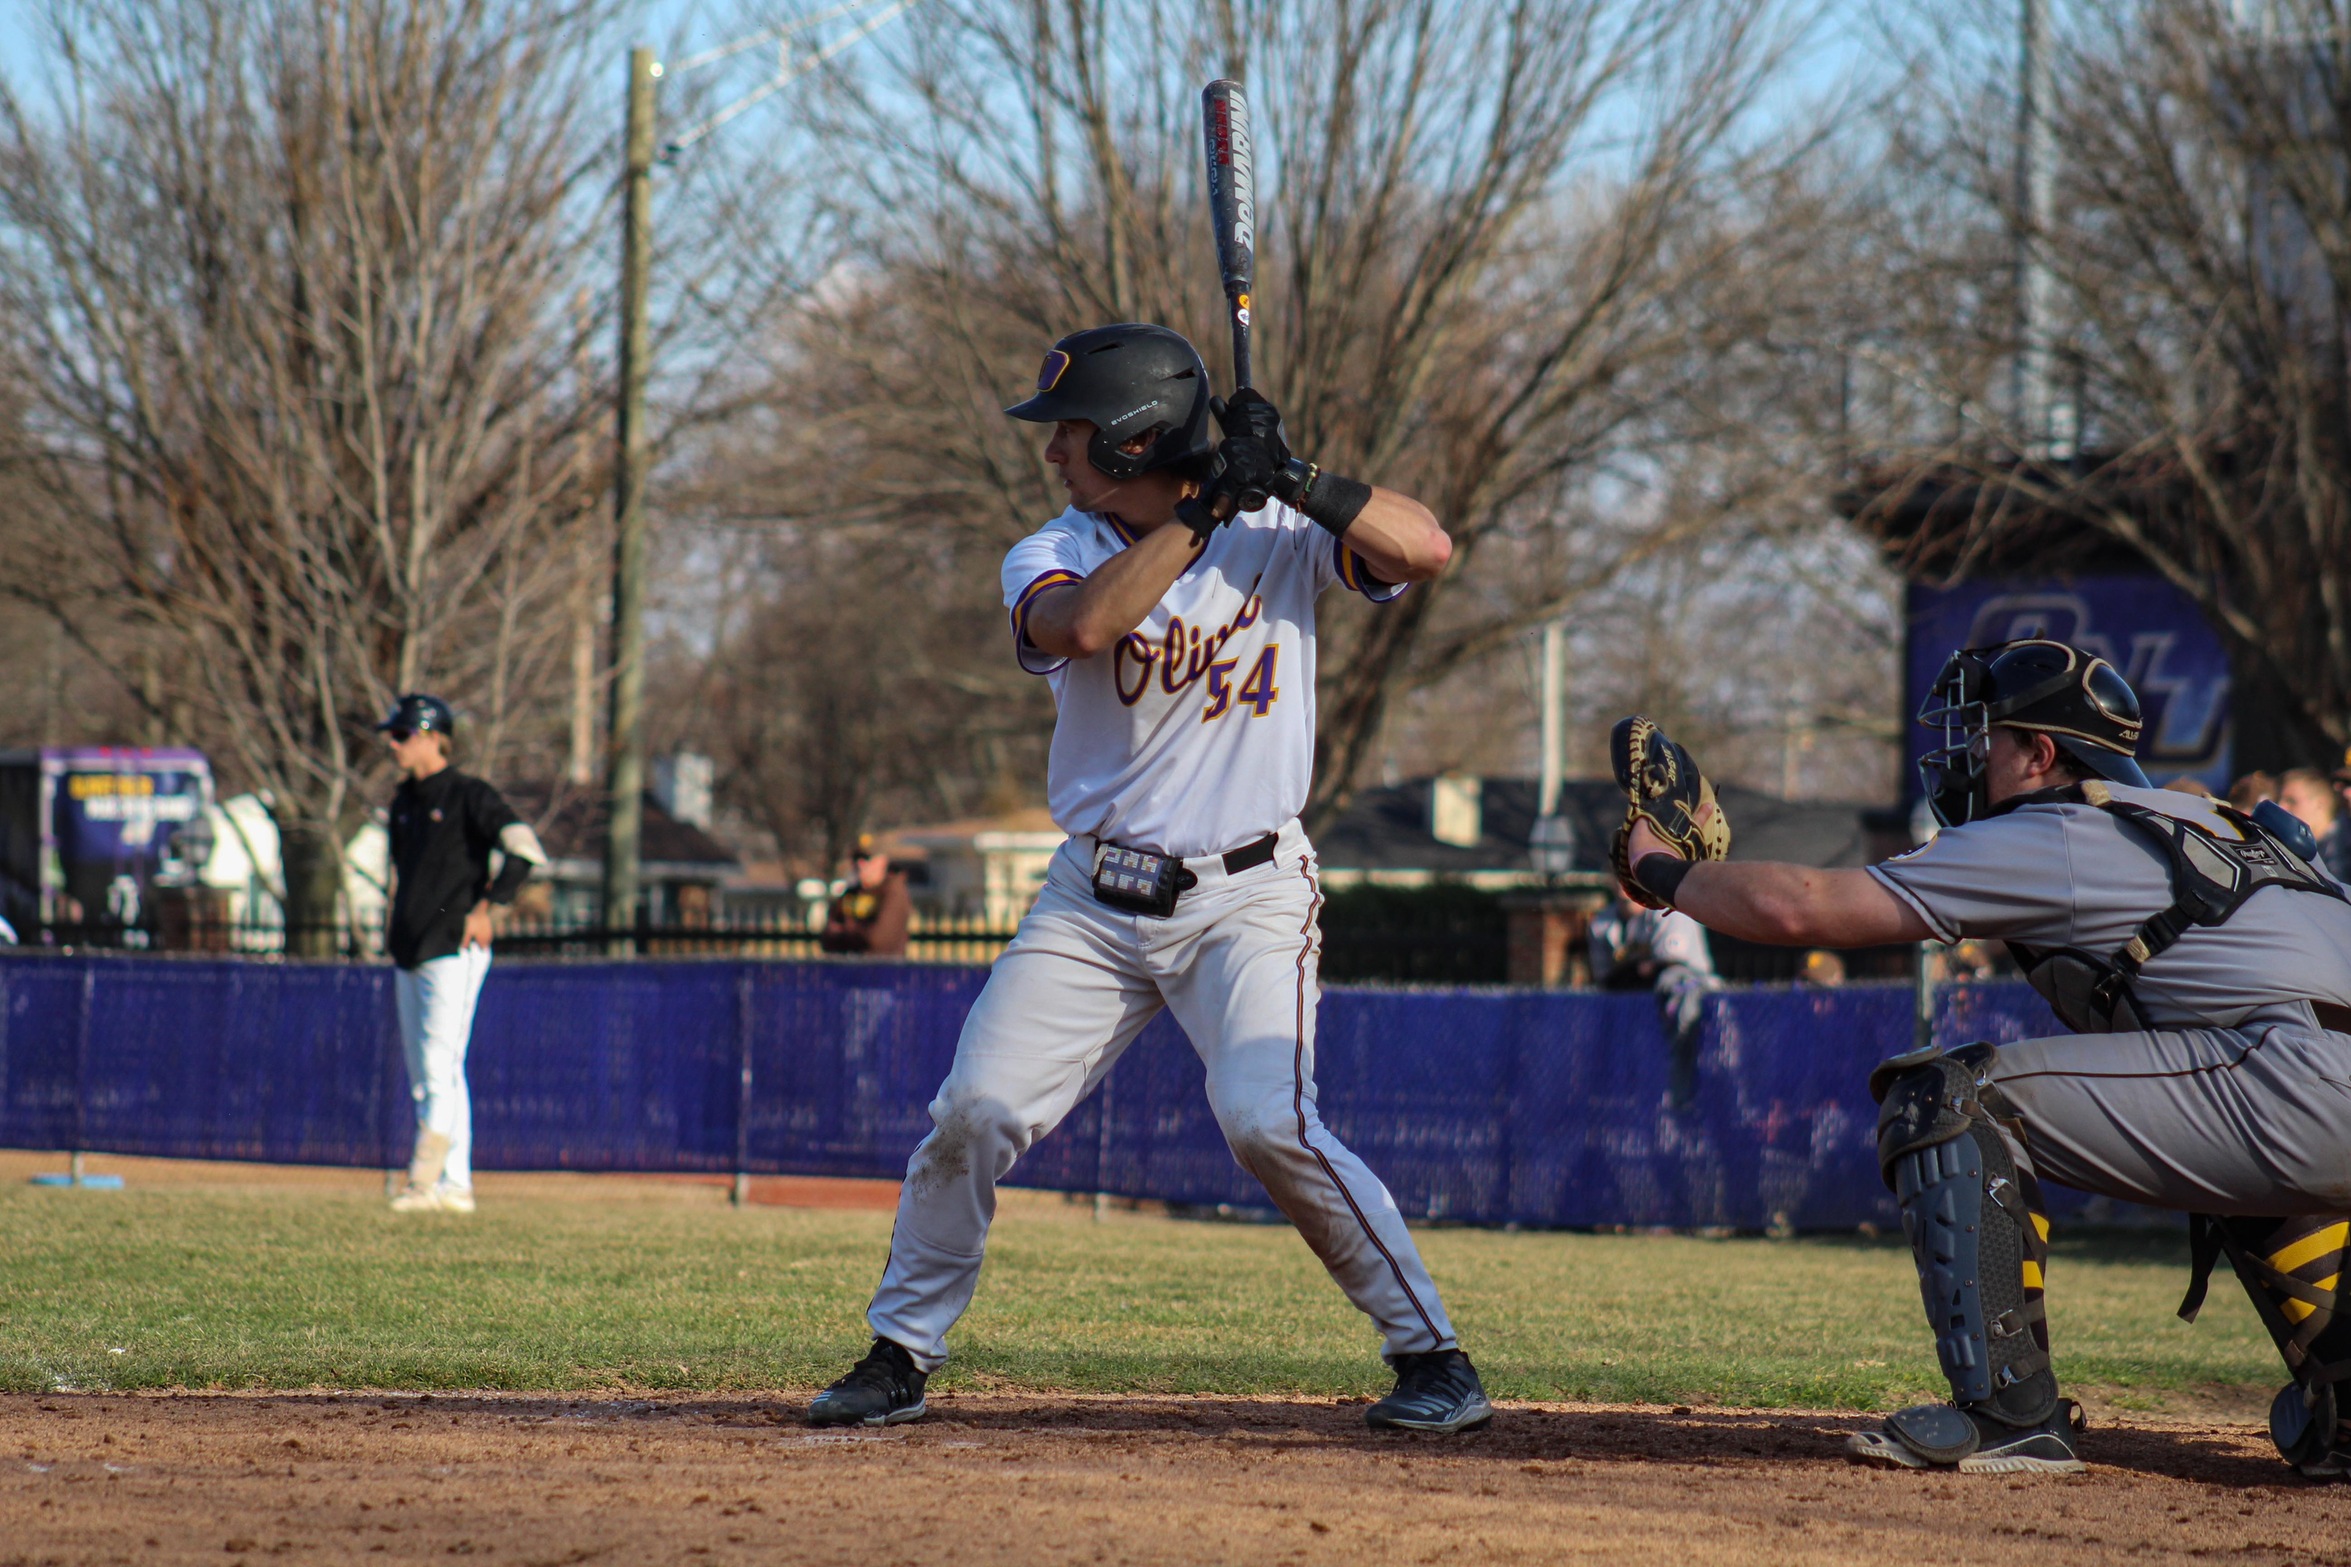 POGIOLI, YELLE, AND YOON HIT HOME RUNS AS THE TIGERS SPLIT THEIR FIRST GAME OF THE SEASON